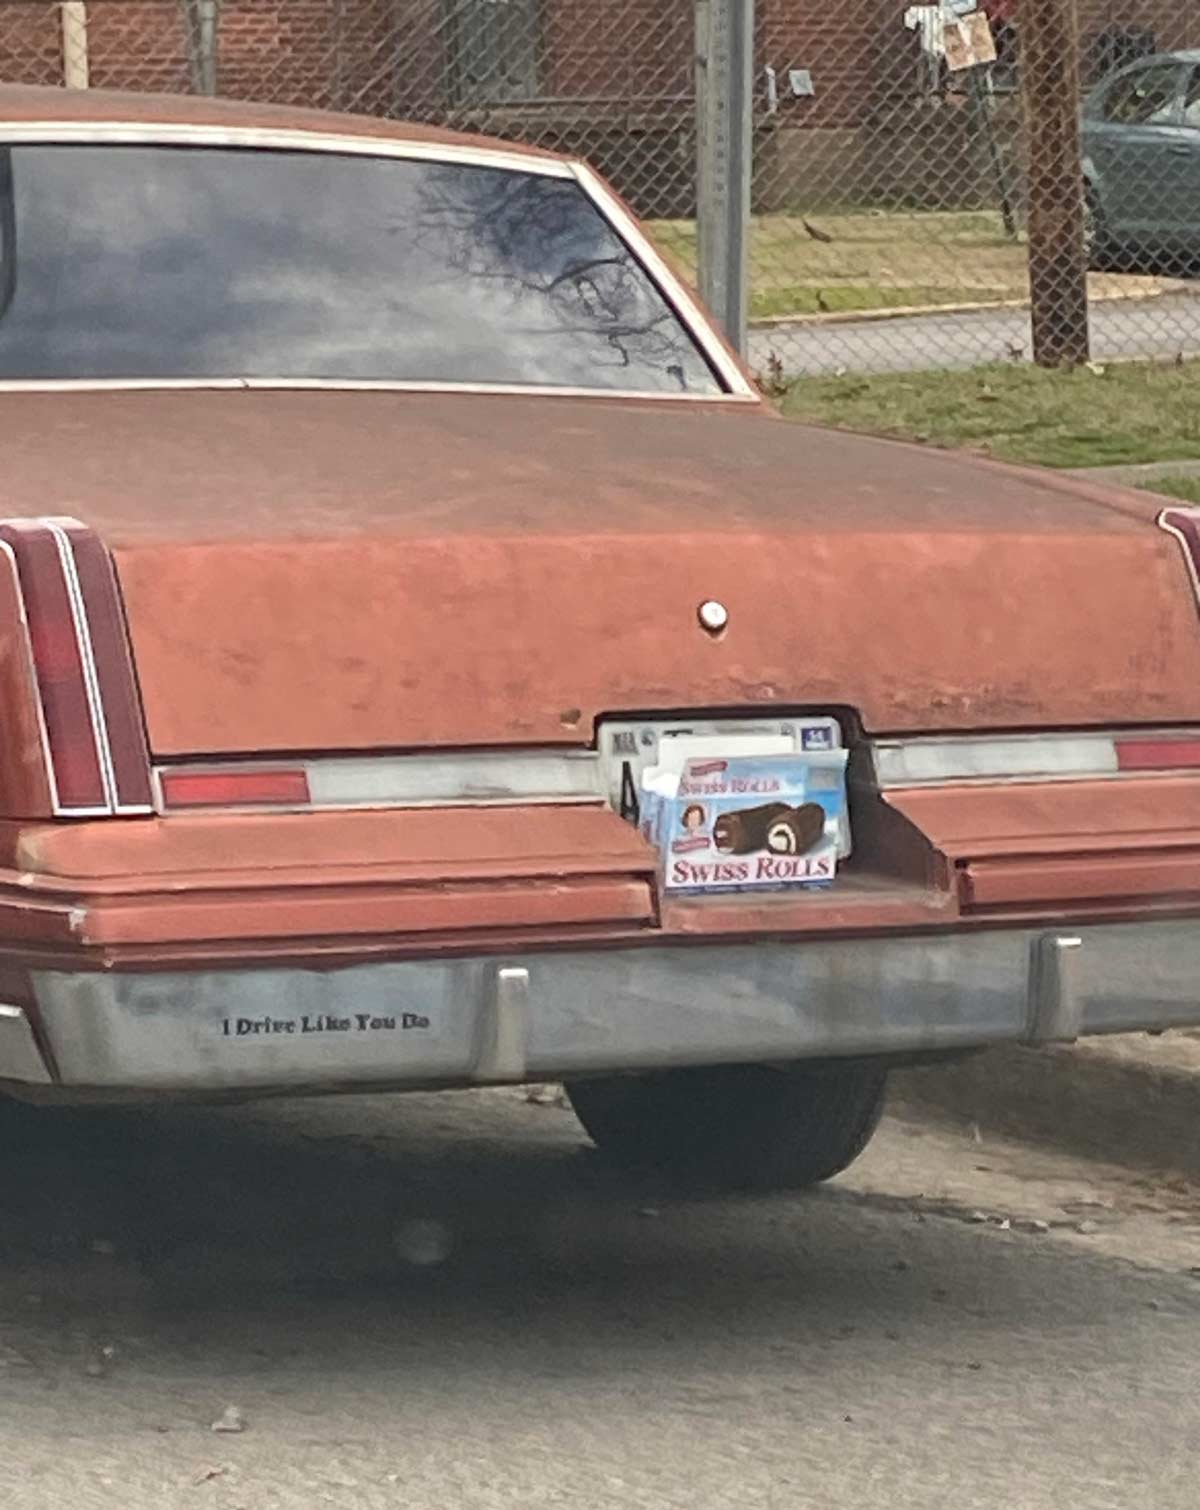 Found this car in downtown Nashville today that had expired tags. And the owner decided to hide it by placing an empty box of Little Debbie Swiss Rolls in front of it